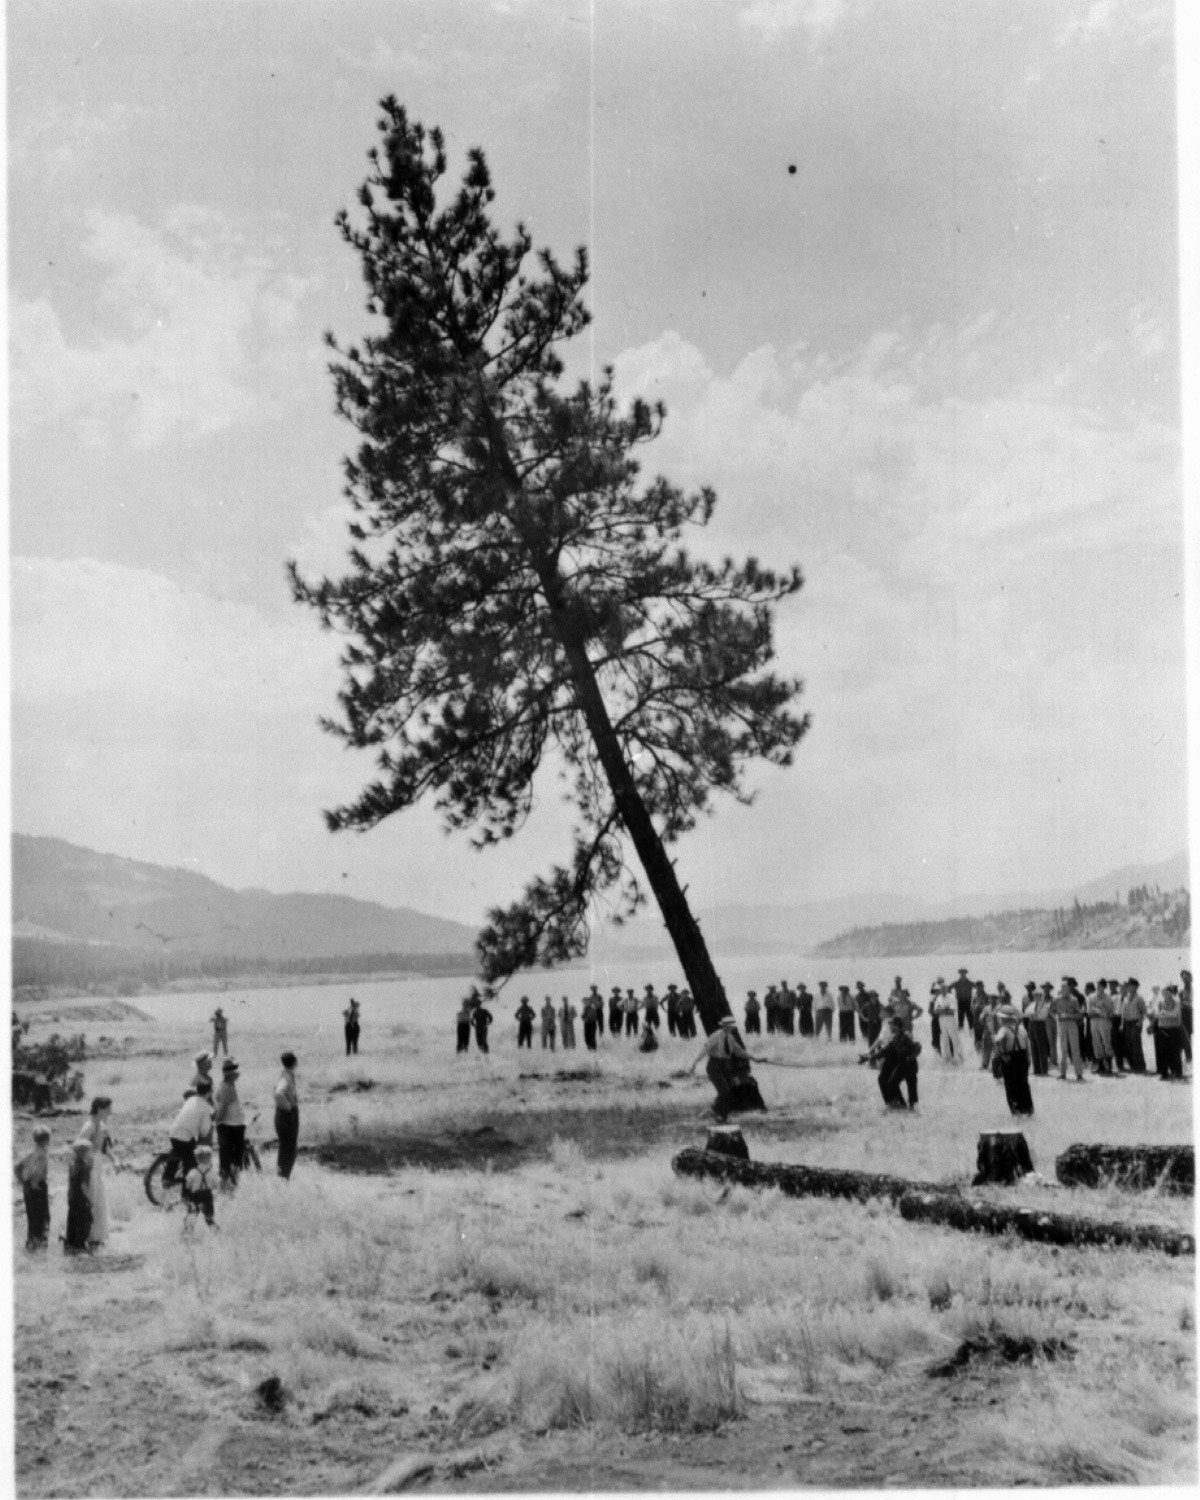 July 19, 1941. The last tree is cleared to make way for the reservoir.